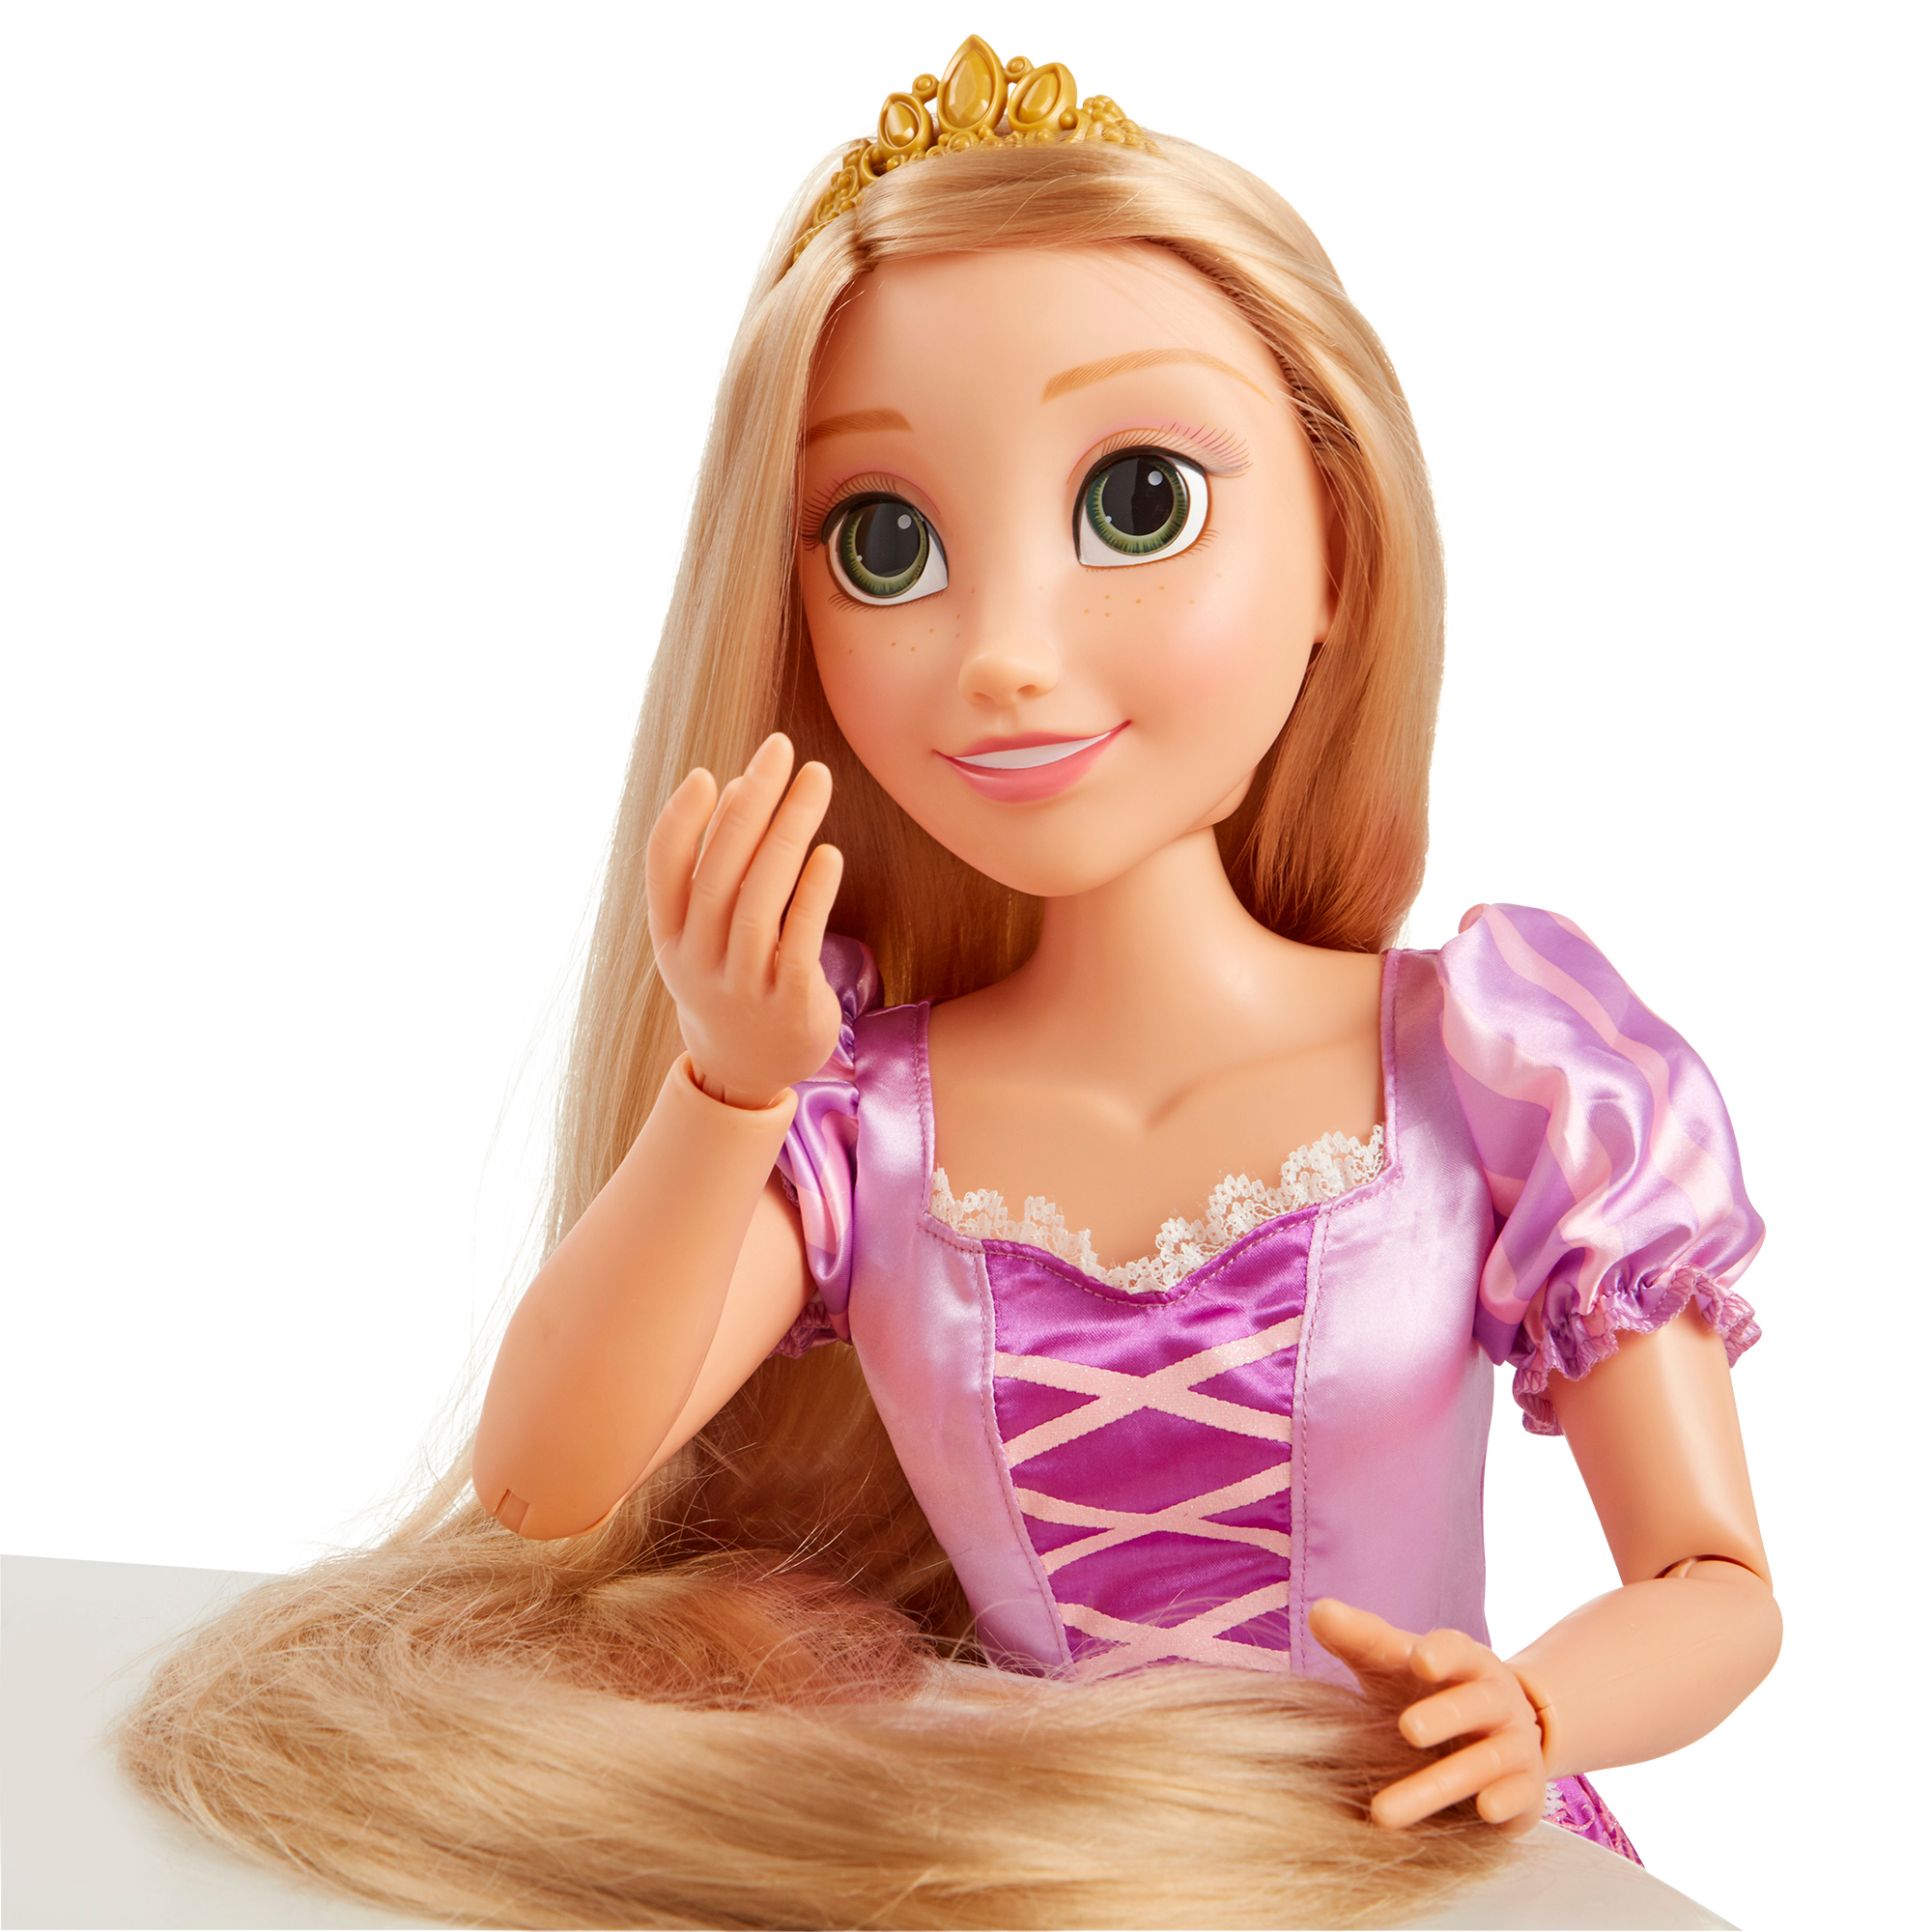 Disney Princess 32 inch Playdate Rapunzel Doll, for Children Ages 3+ - image 7 of 8